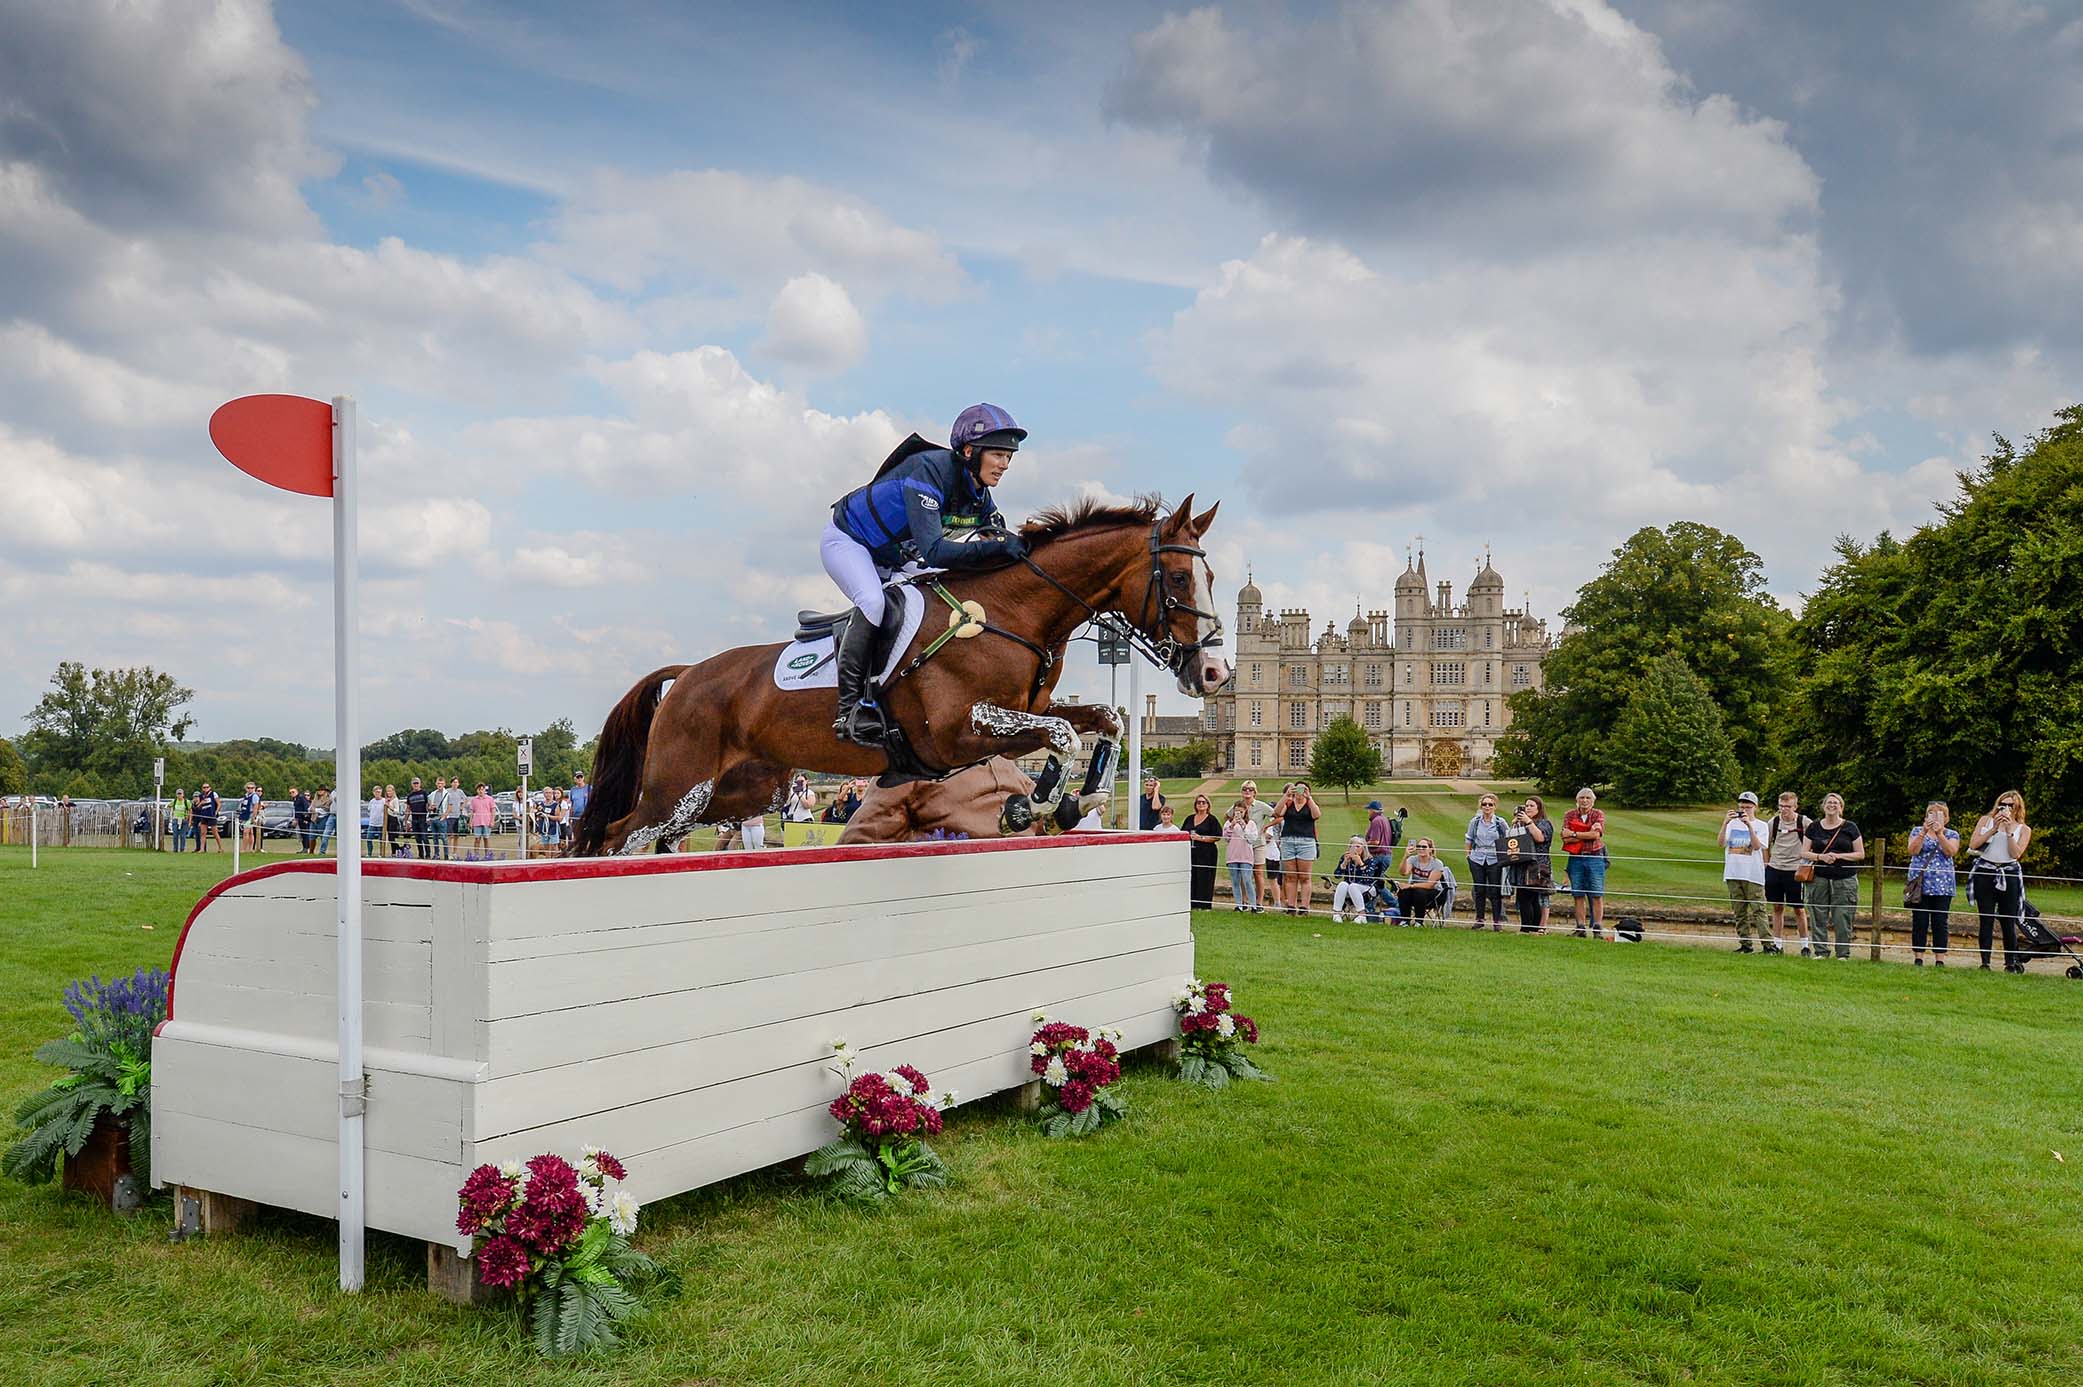 Zara Tindall riding Class Affair in cross country stage at the Defender Burghley Horse Trials, Image: Nixon Photo/Burghley Horse Trials.